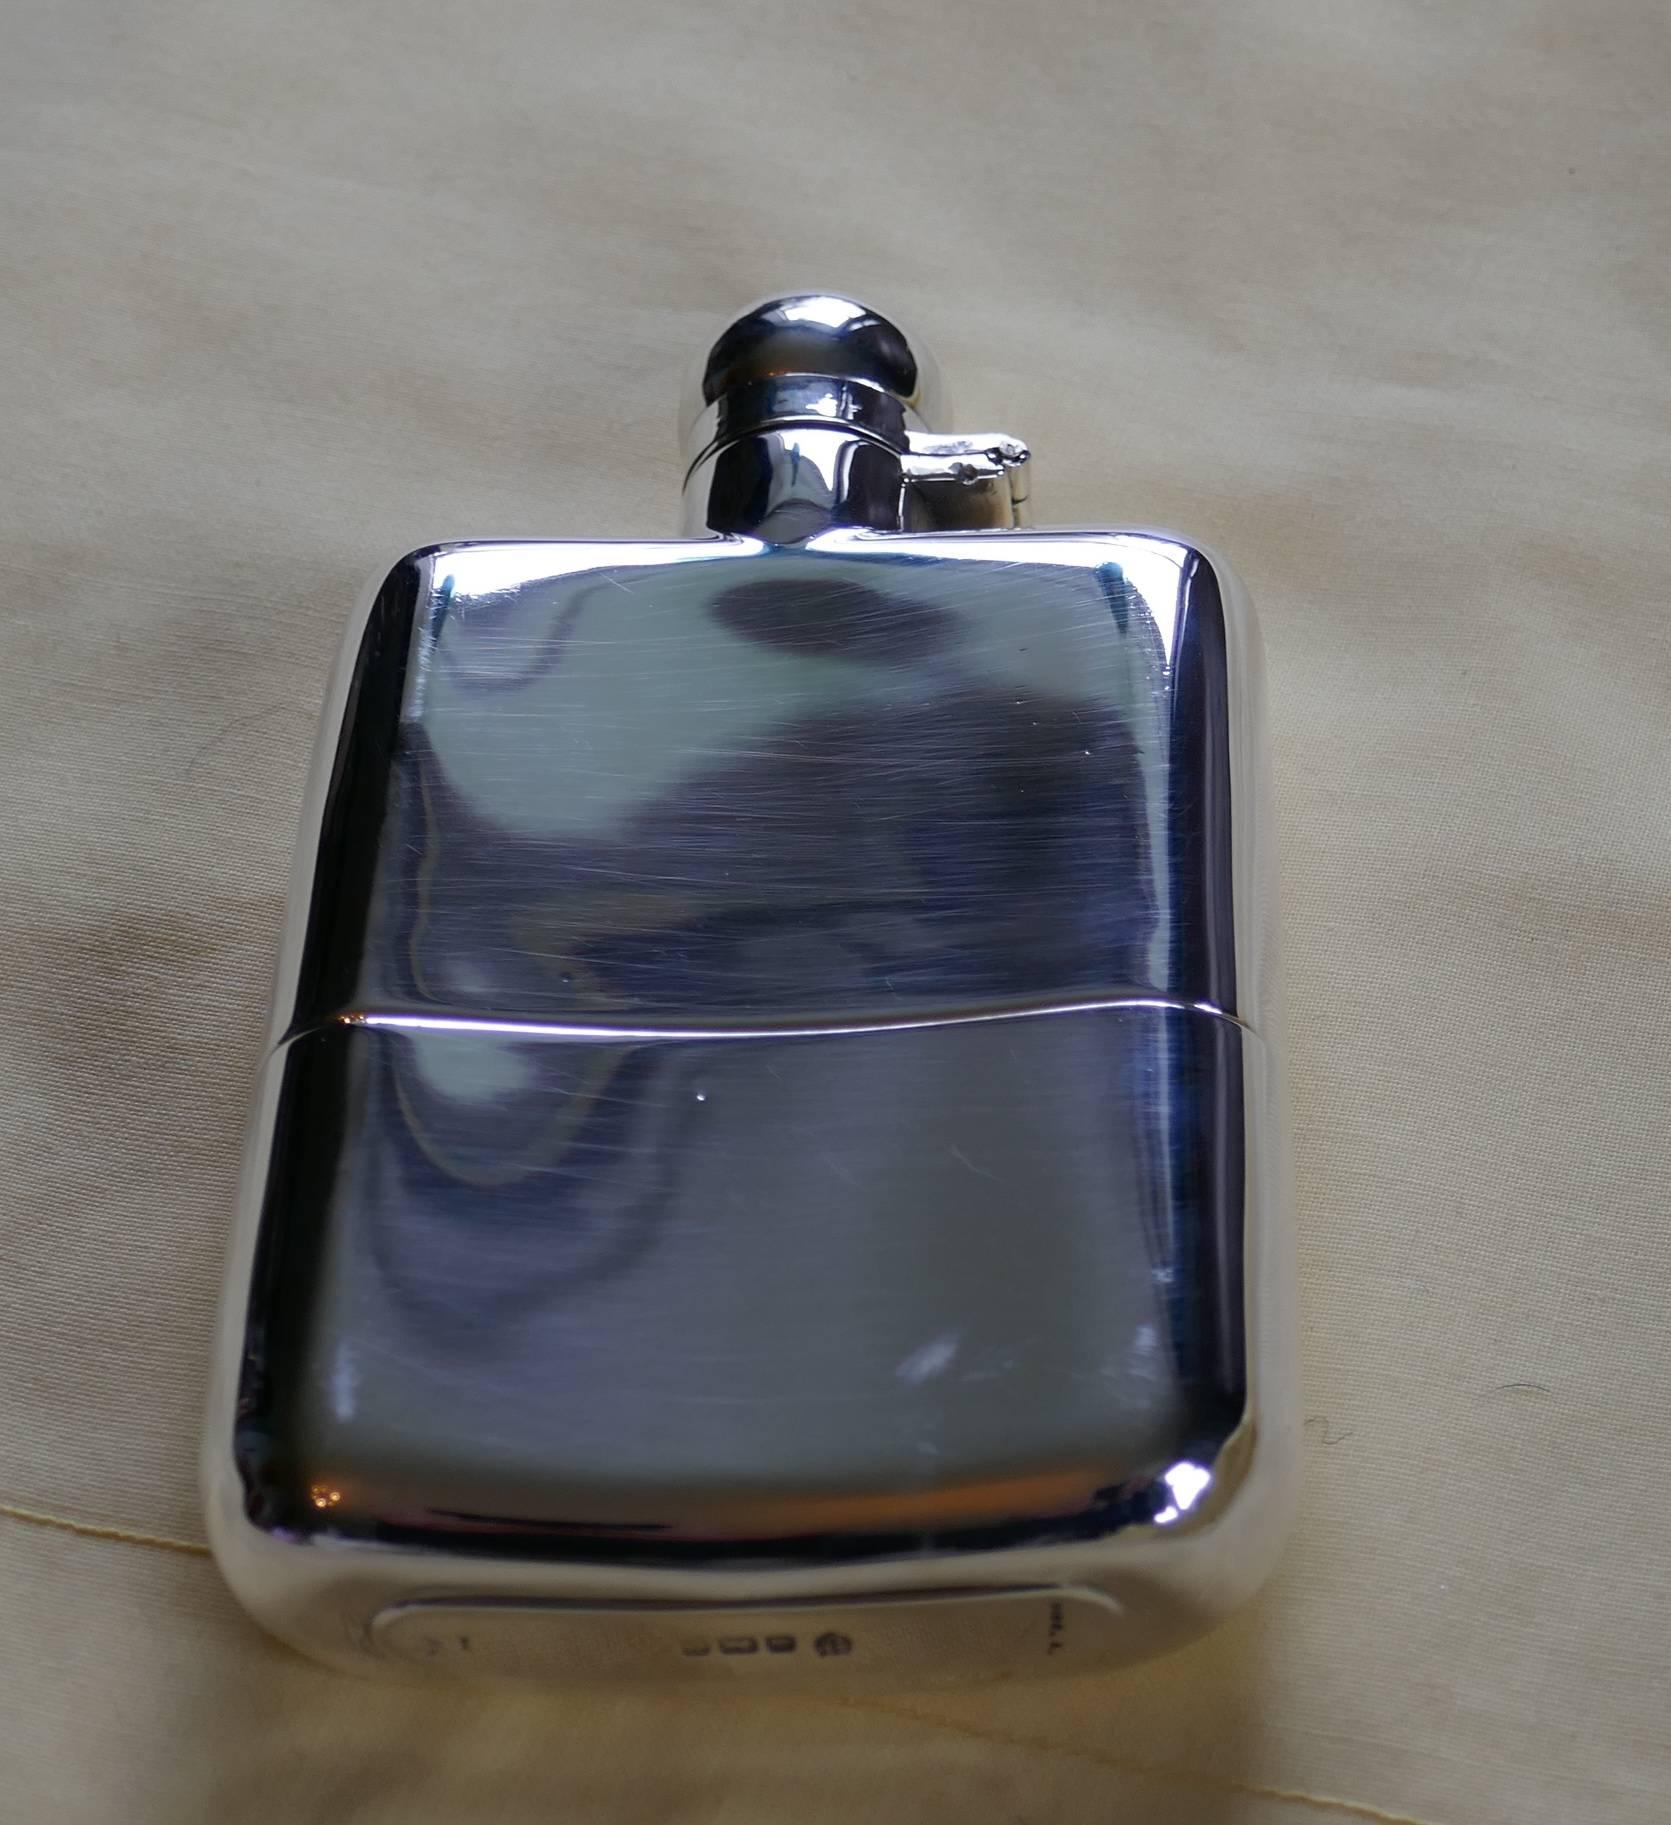 A Solid Silver Hall Marked Hip Flask and Cup by Stewart Dawson & Co, 1912

A lovely piece the flask has a slight curve, hinged lid with turning locking grip and a good size cup, which pulls out from the base. The flask is made by “ Stewart Dawson &